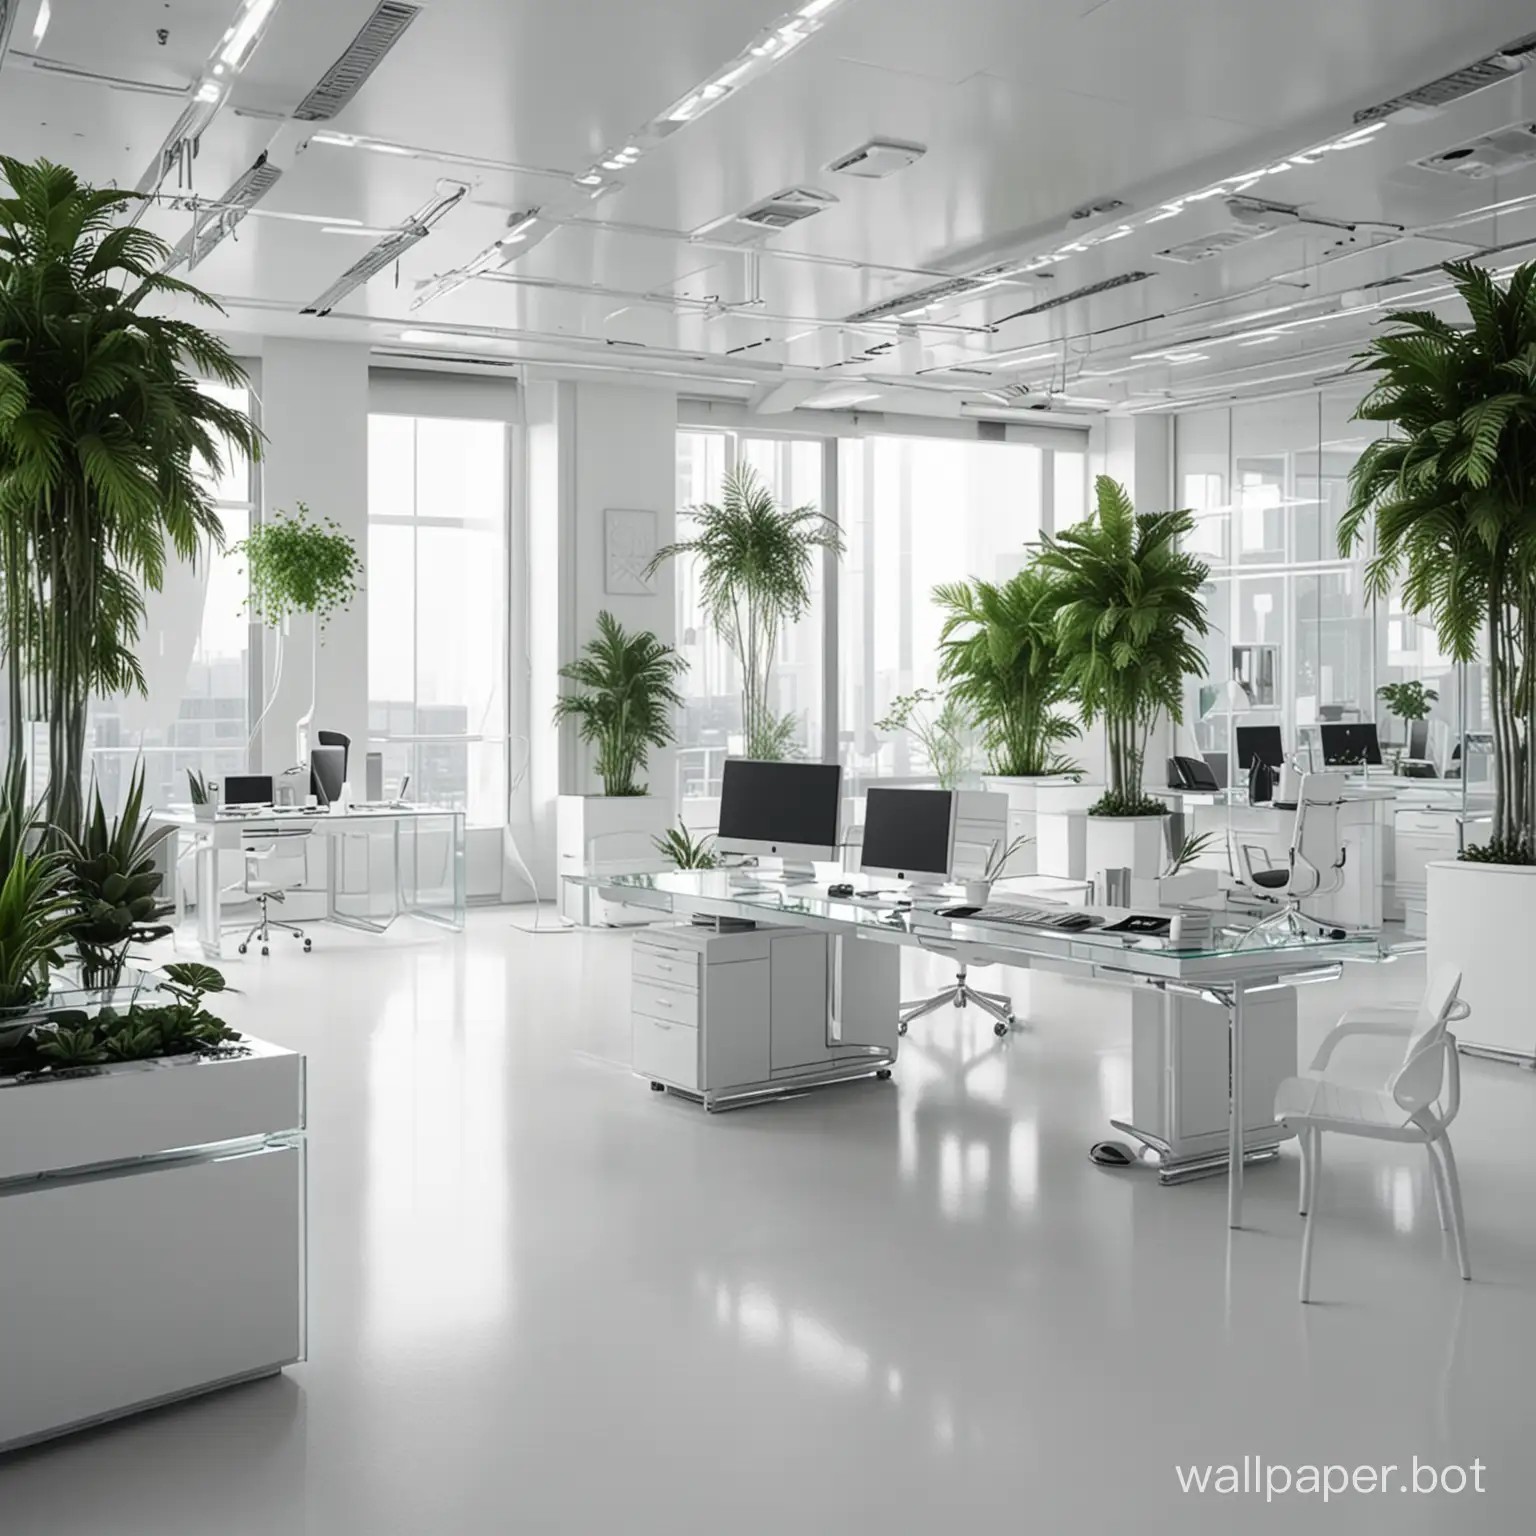 Modern-Office-Interior-with-Futuristic-Elements-and-Plant-Decor